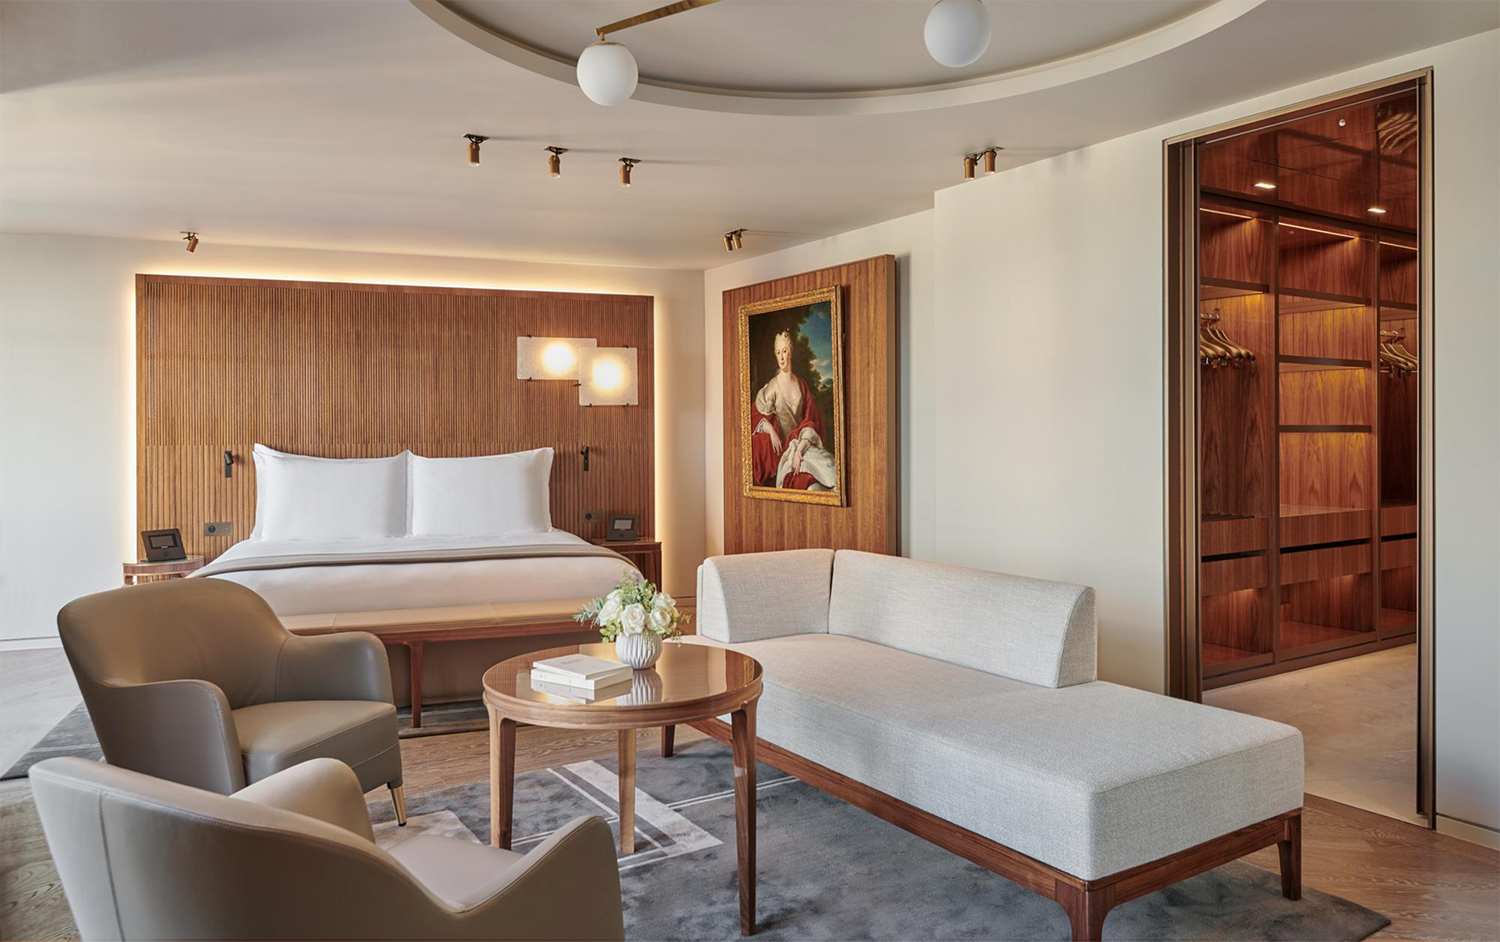 Contemporary white furniture and handcrafted woodwork throughout one of the guest rooms at Hotel Lutetia